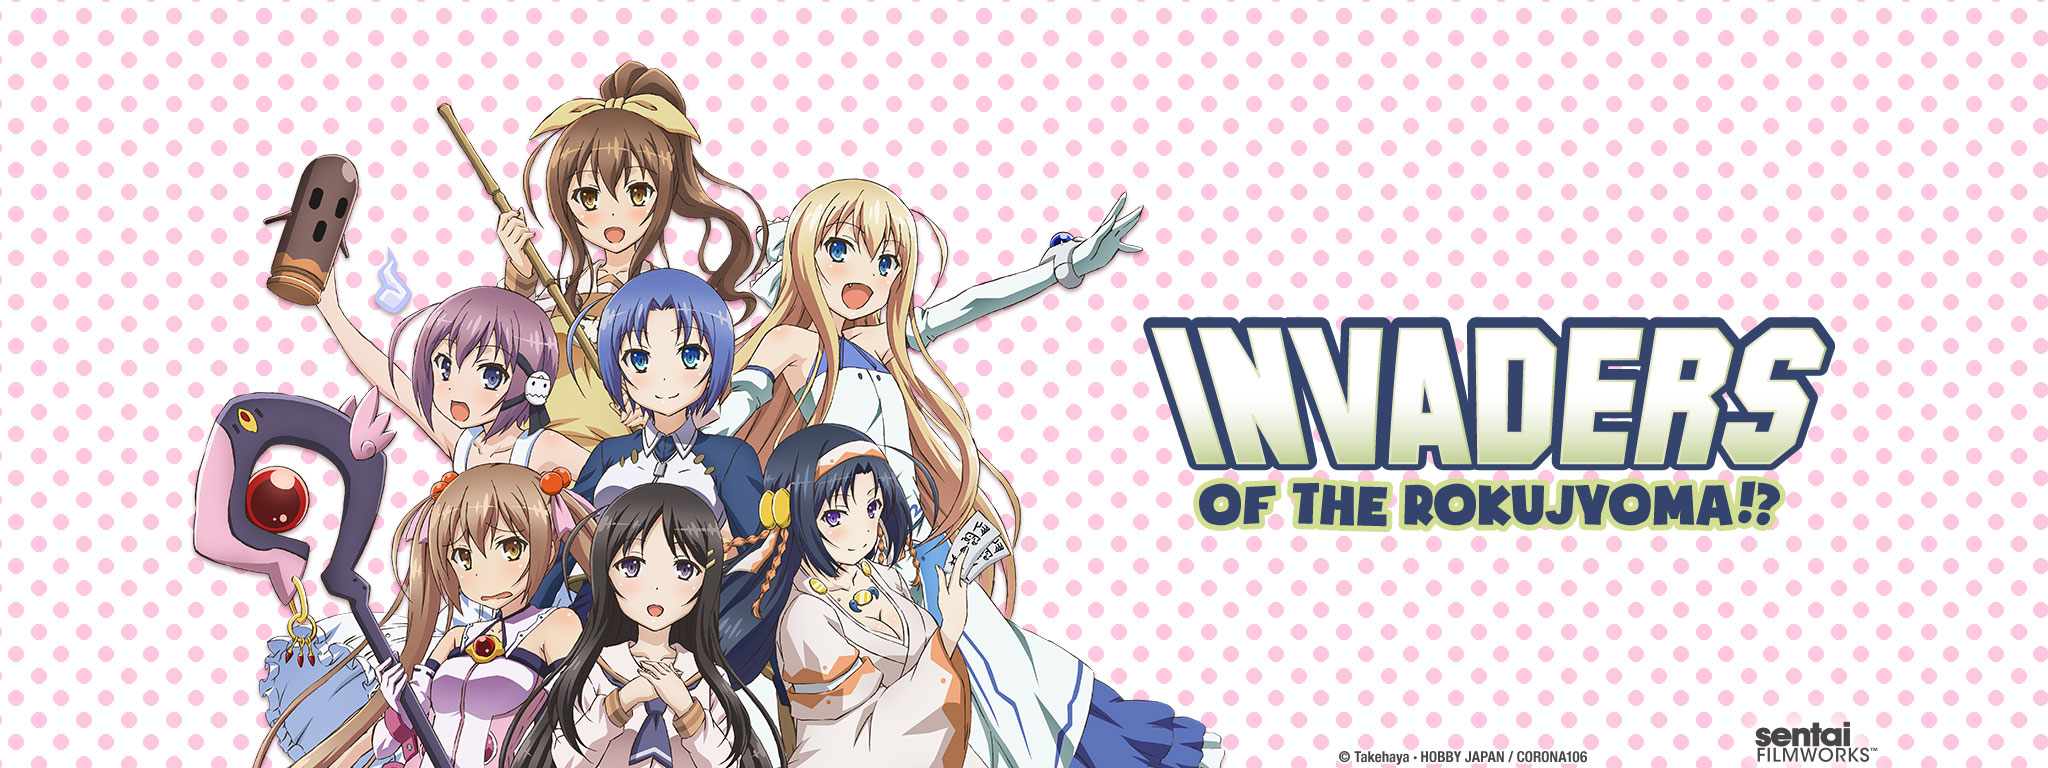 Title Art for Invaders of the Rokujyoma!?